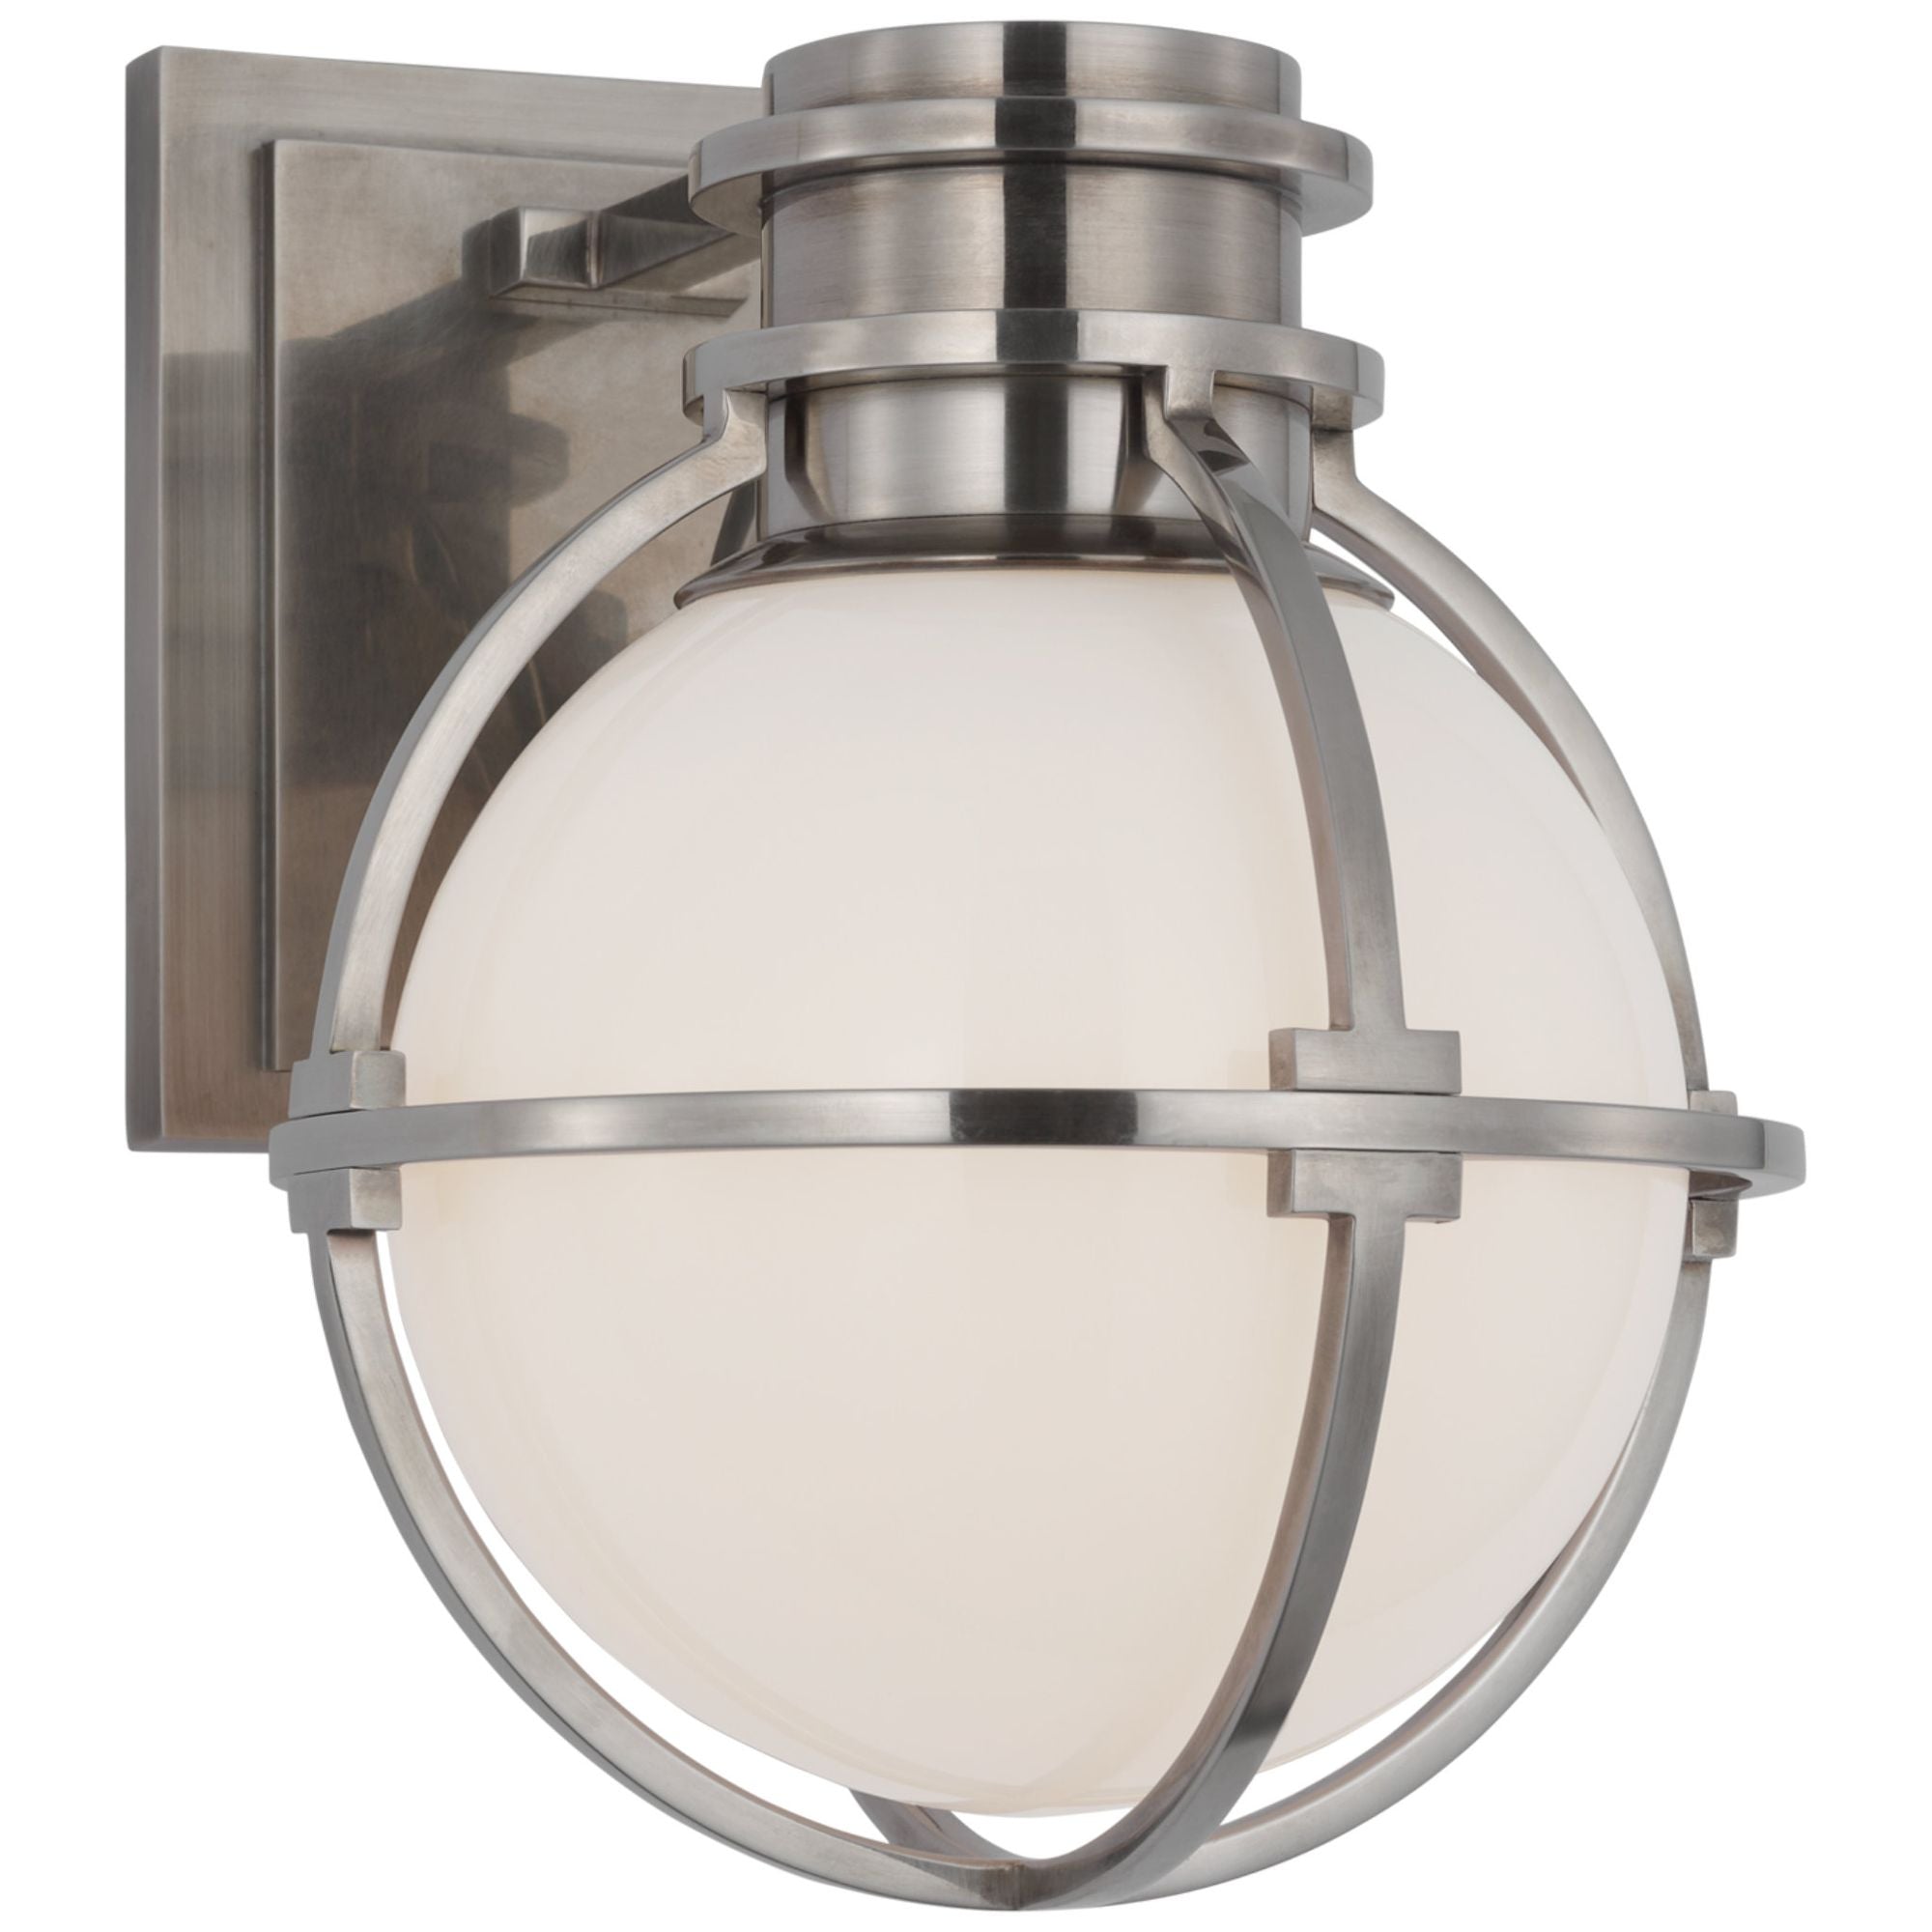 Chapman & Myers Gracie Single Sconce in Antique Nickel with White Glass